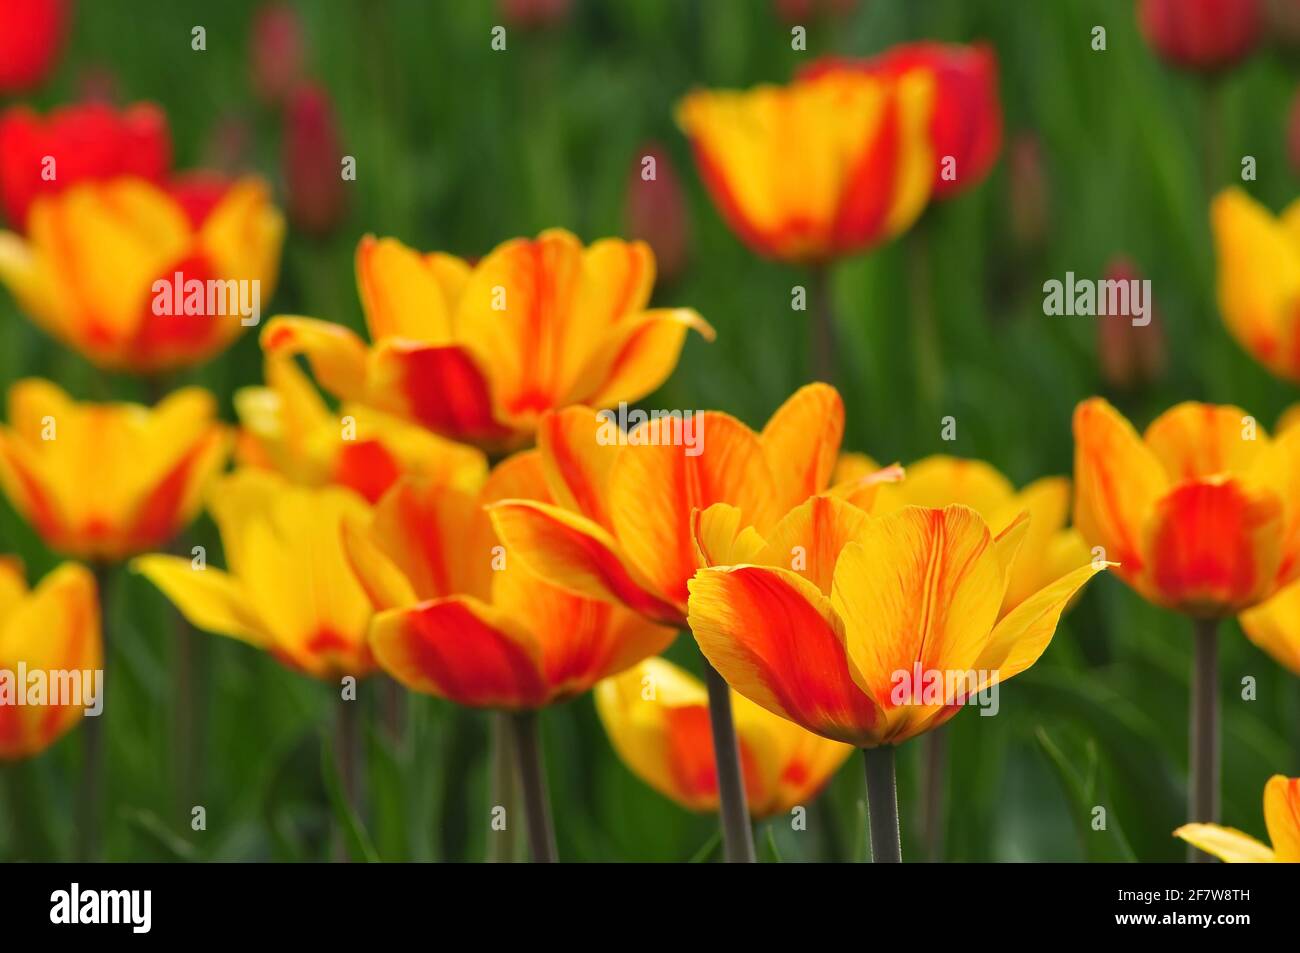 Field of yellow and red tulips. Sunny spring background. Stock Photo